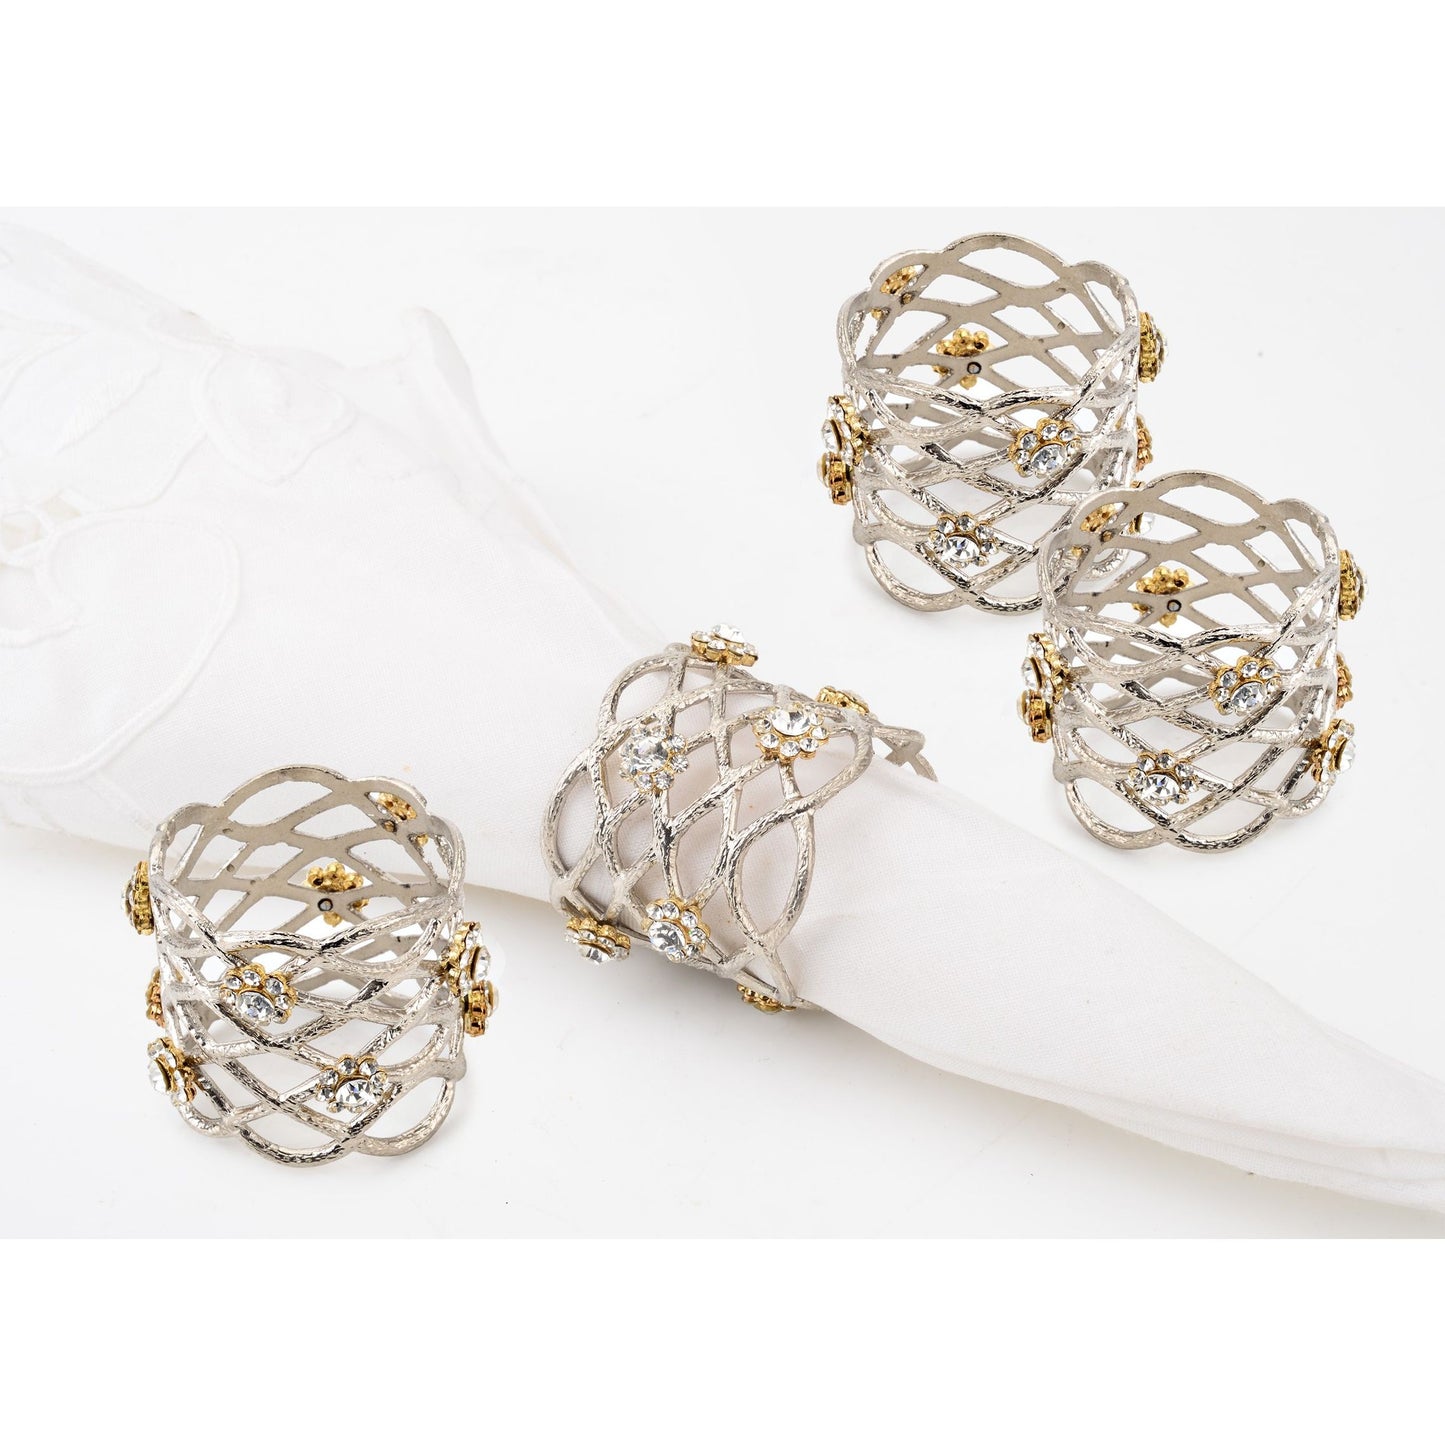 Classic Touch Decor Set 4 Napkin Rings, Nickelplated, 2"